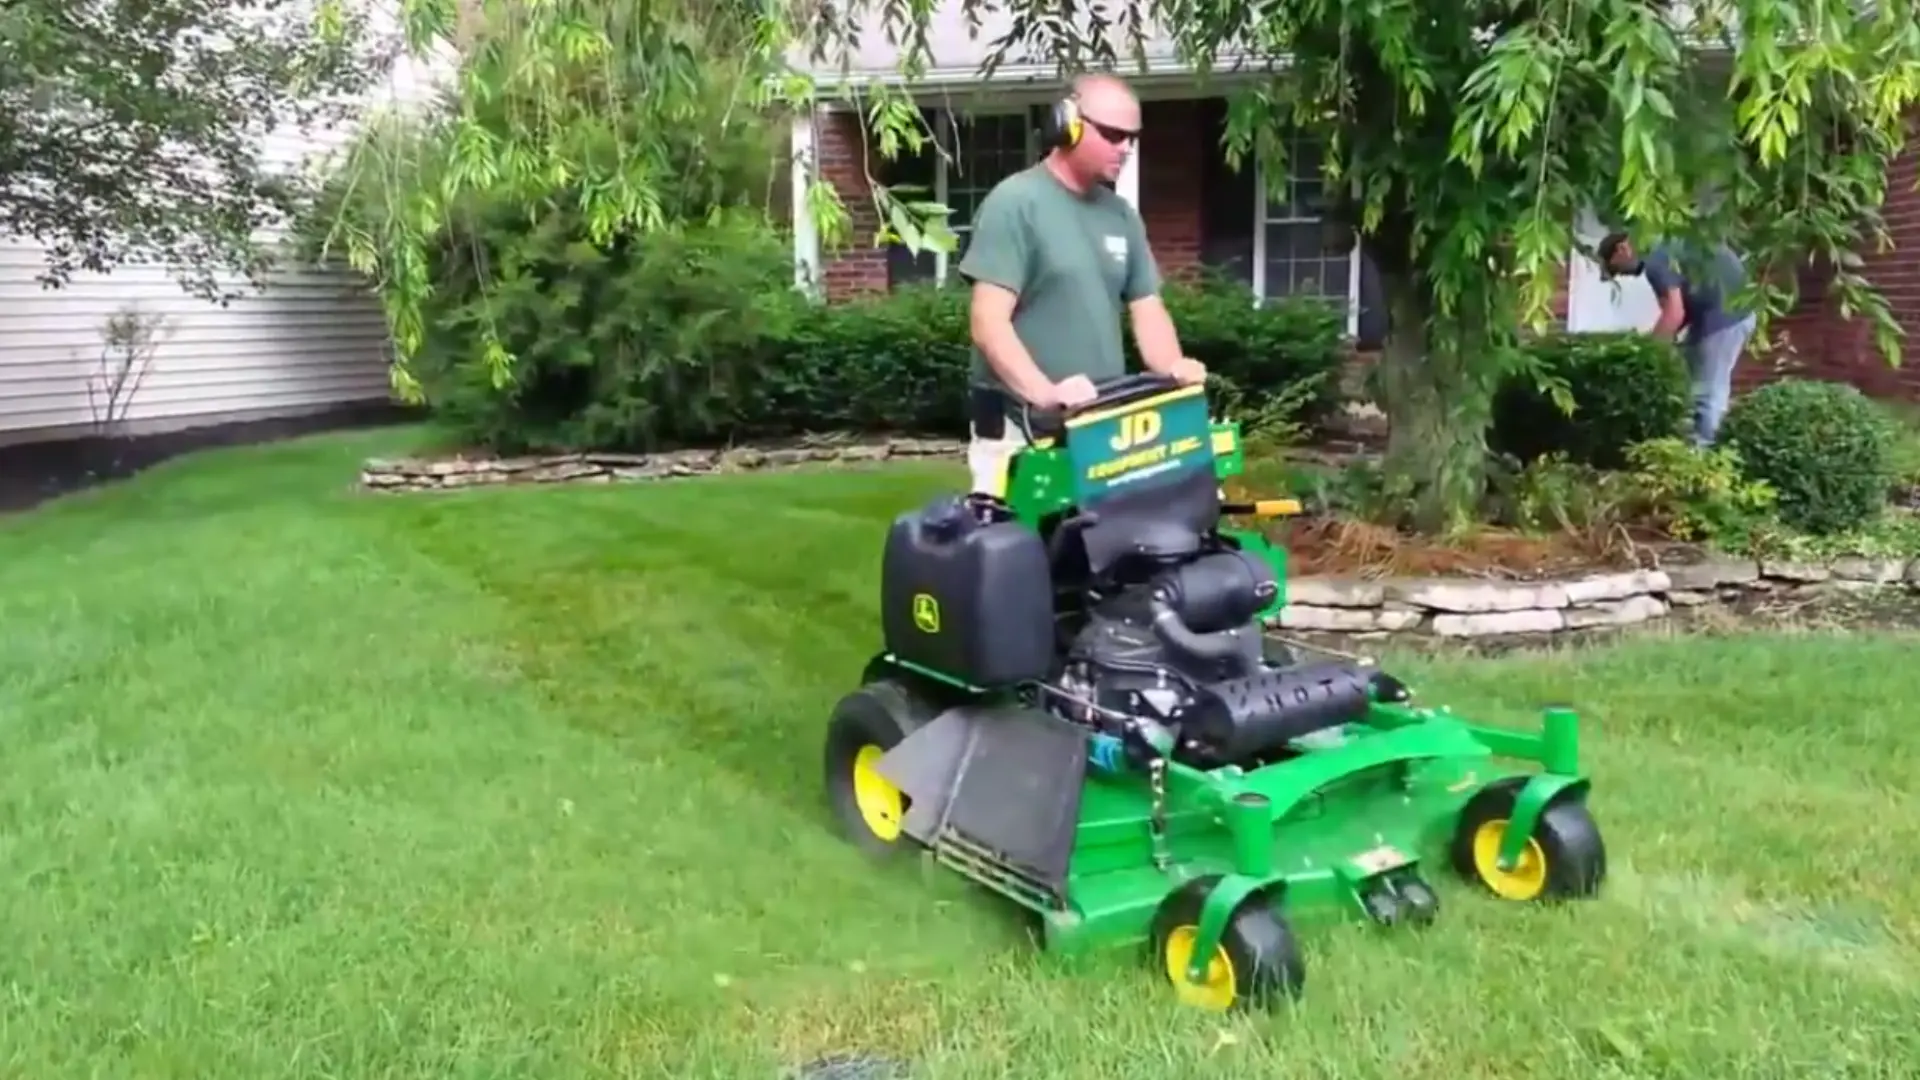 Lawn Mowing Best Practices - The Last Mow Before the First Frost